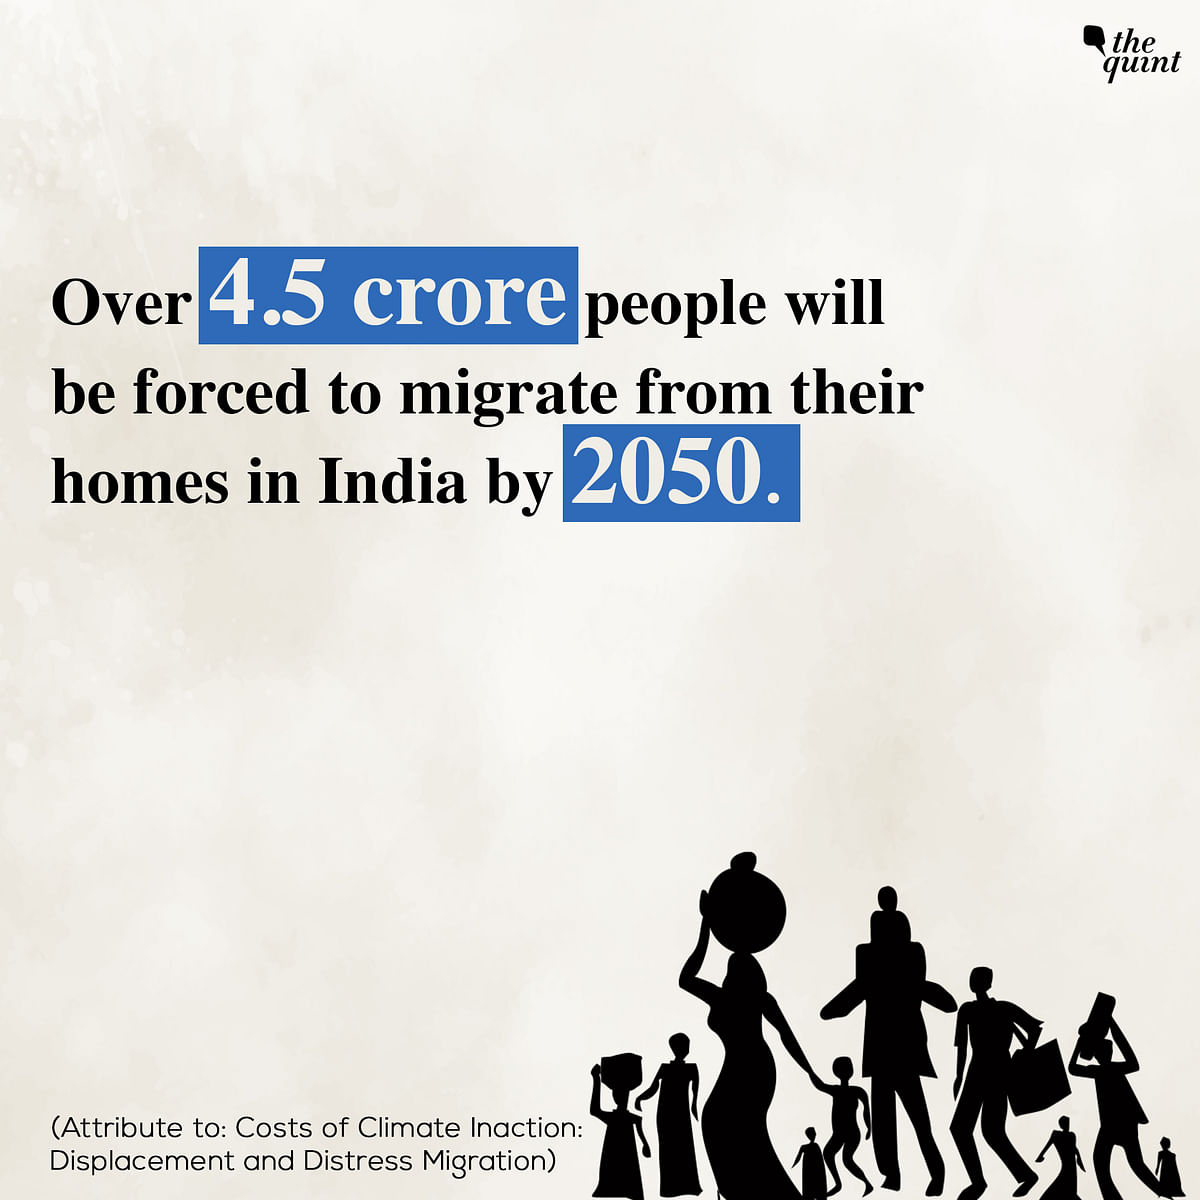 At present, 1.4 crore people in India are displaced due to environmental disruptions, the report said.